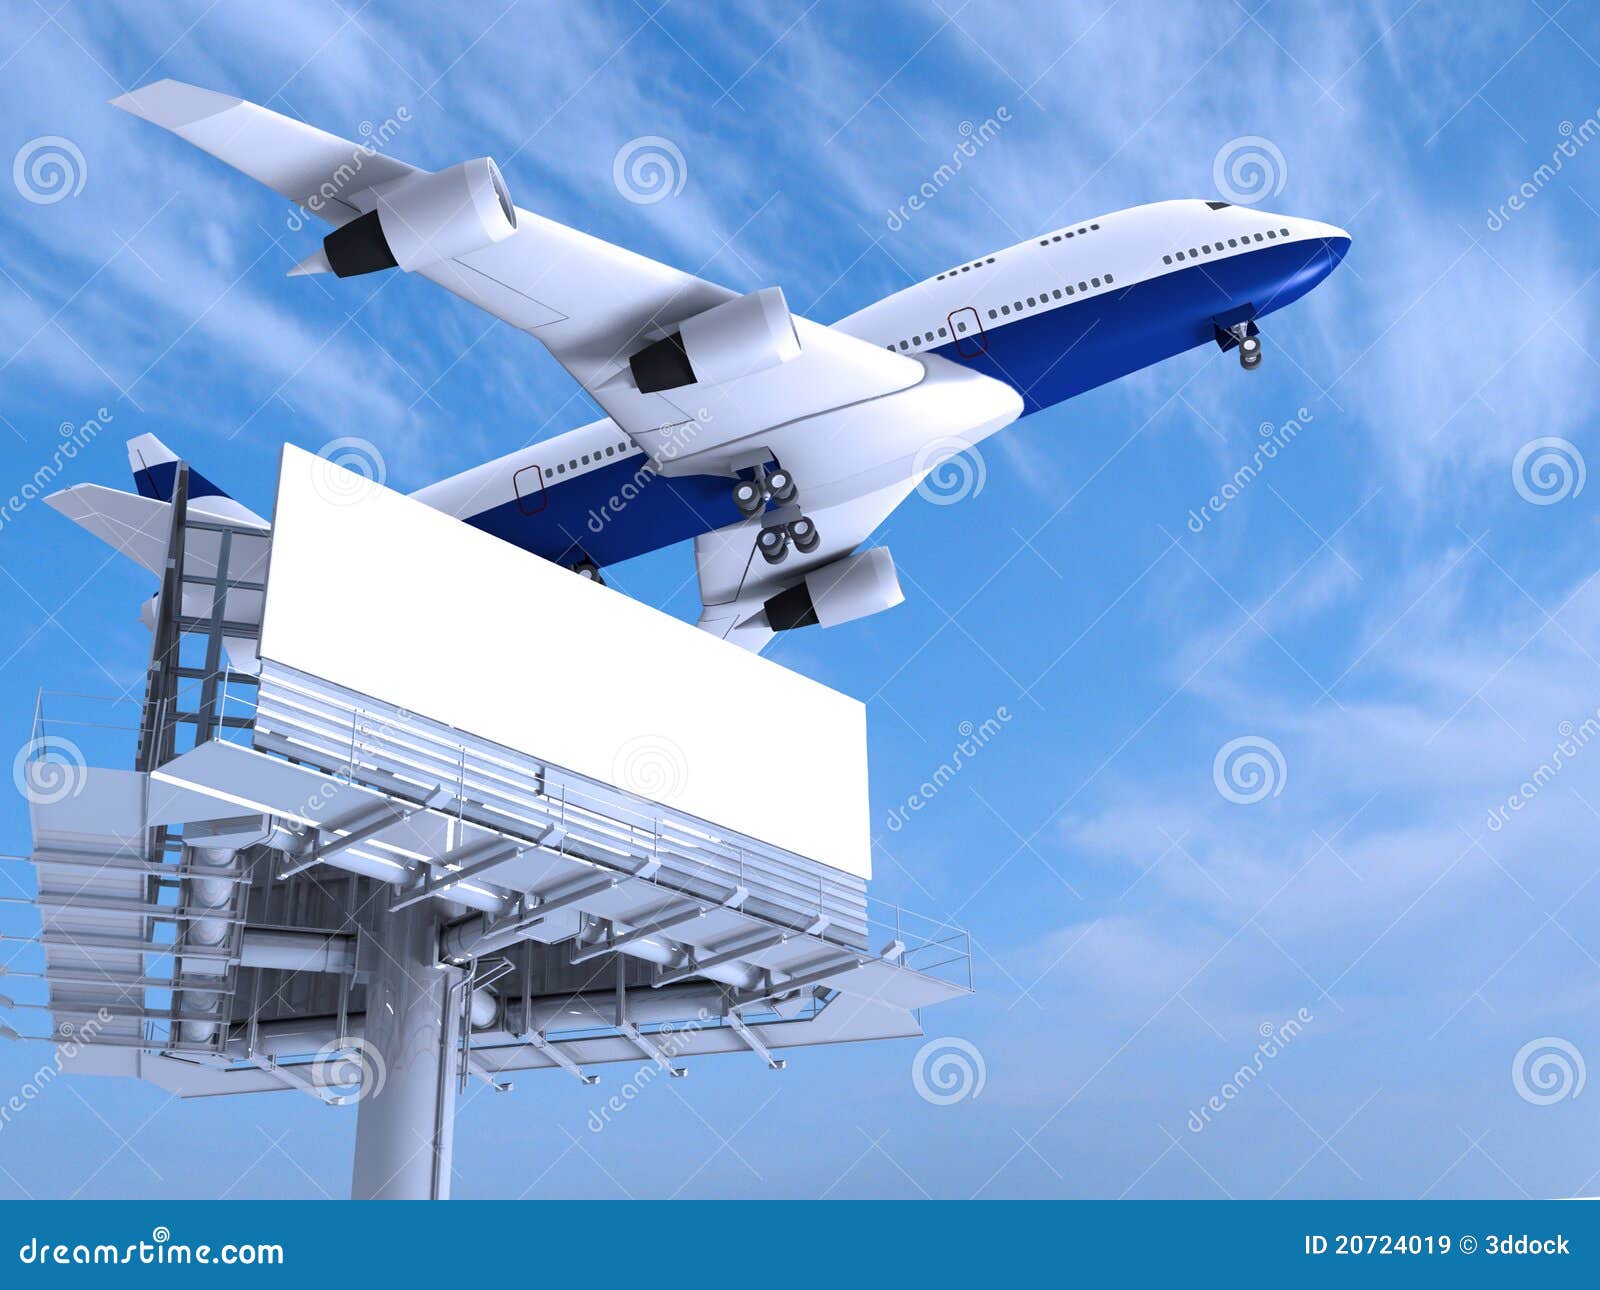 Airplane and billboard stock illustration. Illustration of publicity ...